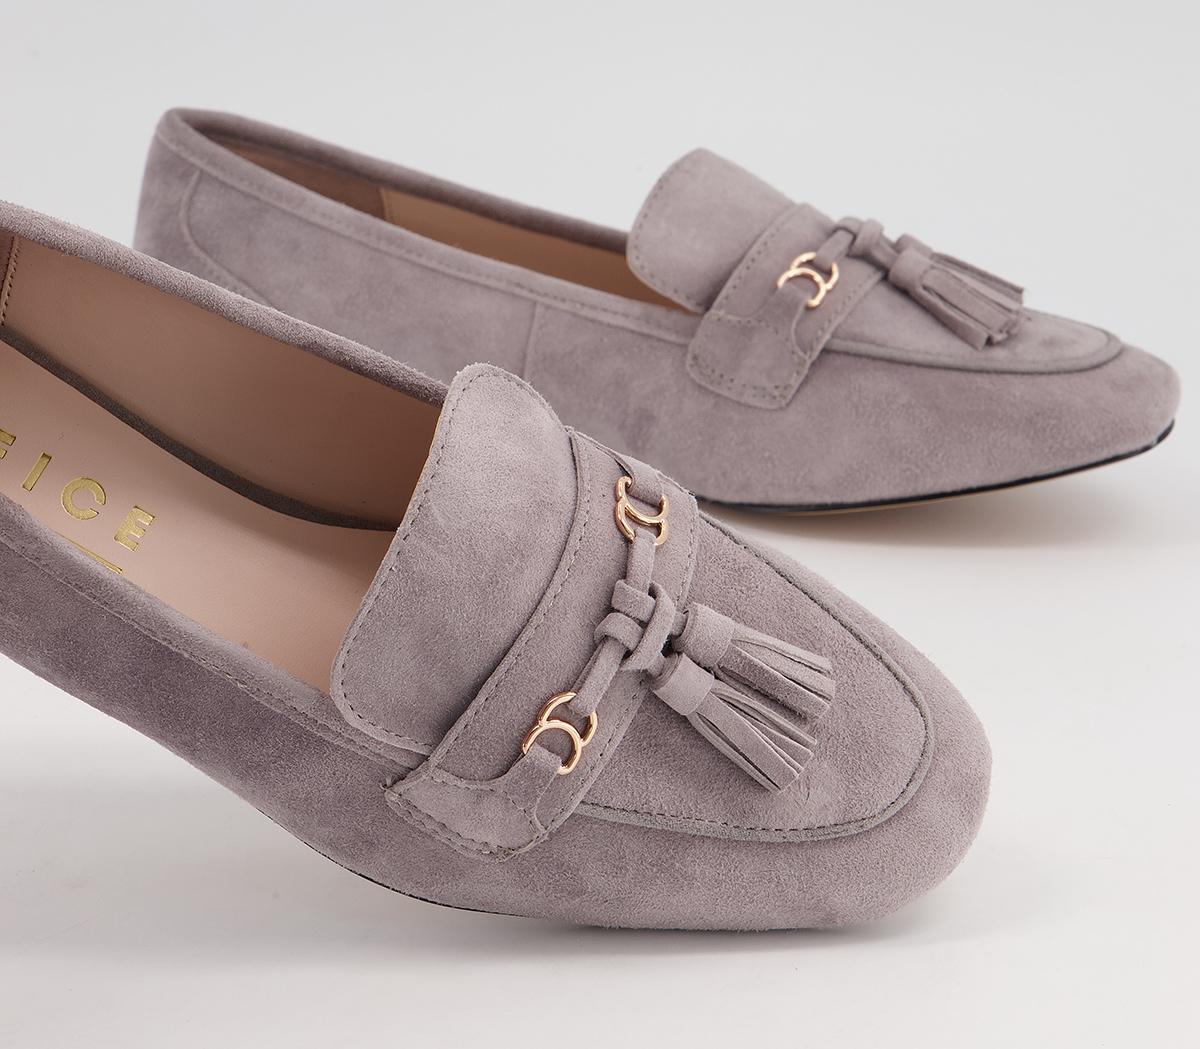 OFFICE Funded Tassel Loafers Grey Suede - Office Girl